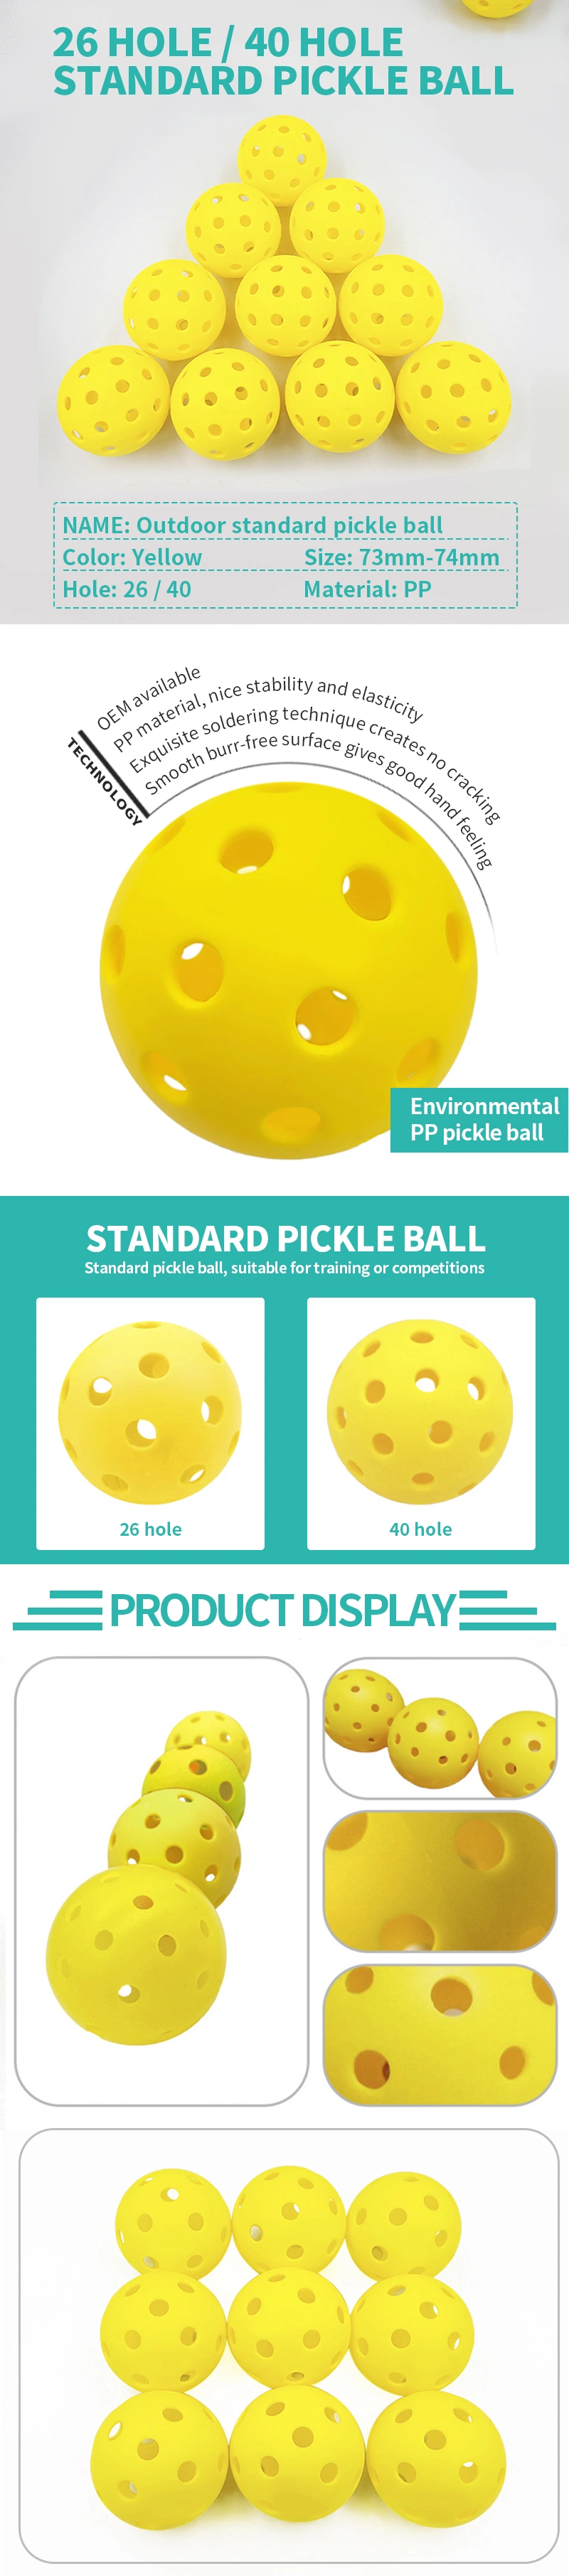 Wholesale 26 or 40 Holes Pickle Ball Game Custom Usapa Standard Outdoor Pickleball Ball for Training